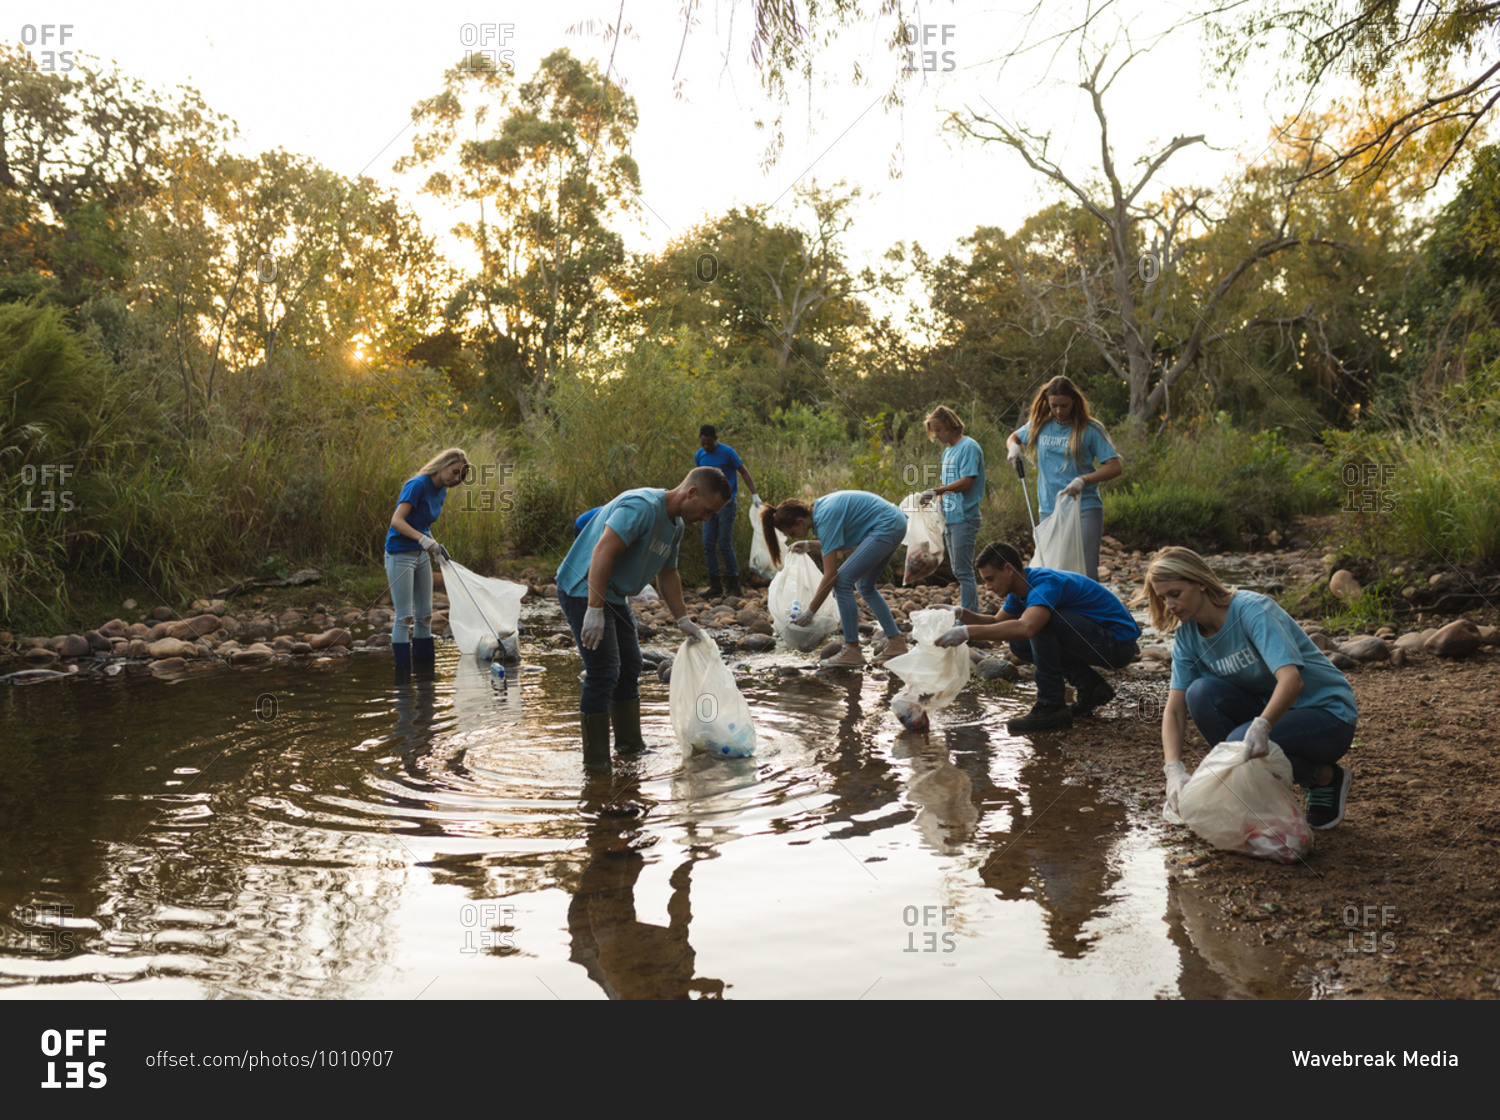 Multi ethnic group of conservation volunteers cleaning up river in the countryside, picking up rubbish. Ecology and social responsibility in rural environment.